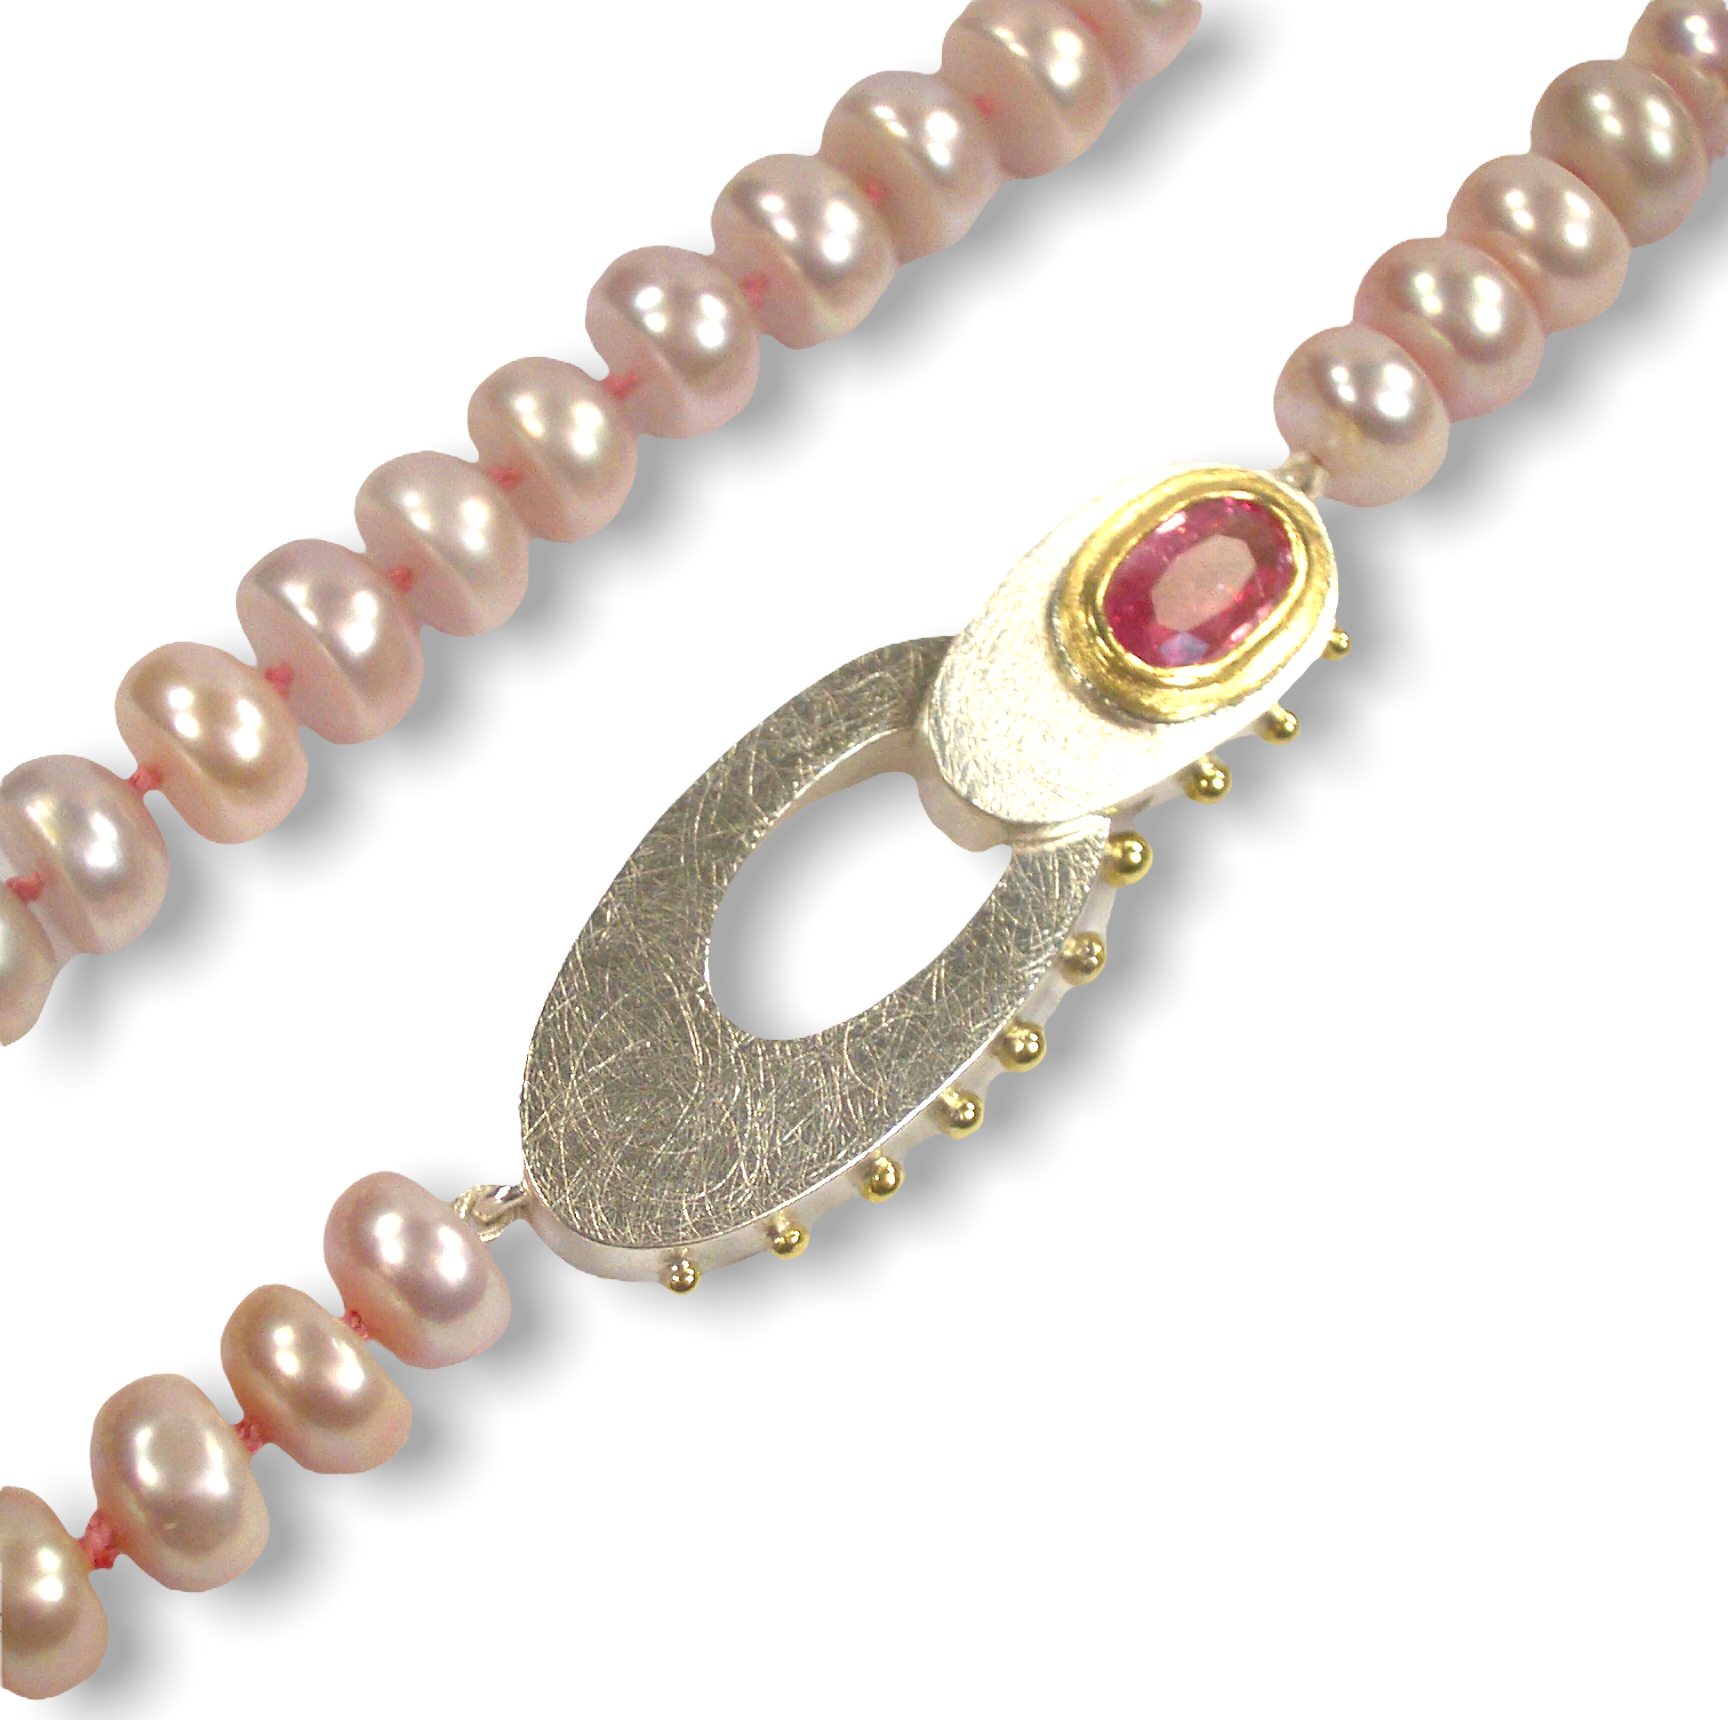 Sarah's Custom Bespoke Pink Pearl Necklace With Oval Box Clasp | In Silver And 18ct Yellow Gold | Set With A Pinky Peach Padparadscha Sapphire